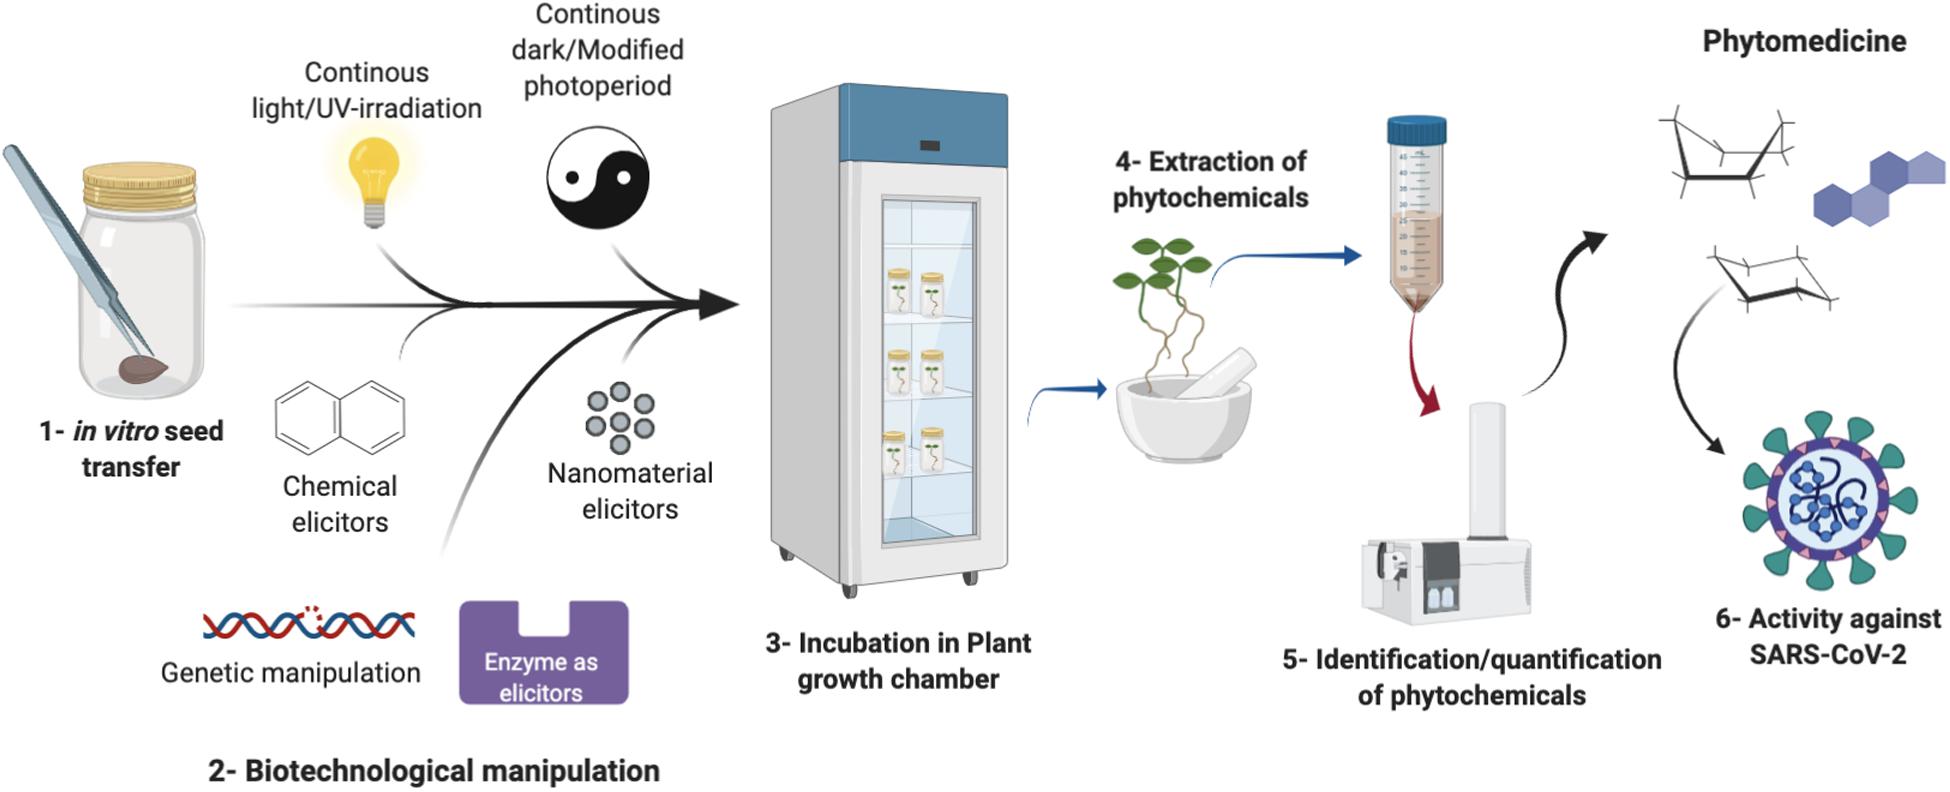 Frontiers Plant In Vitro Culture Technologies A Promise Into Factories Of Secondary Metabolites Against Covid 19 Plant Science